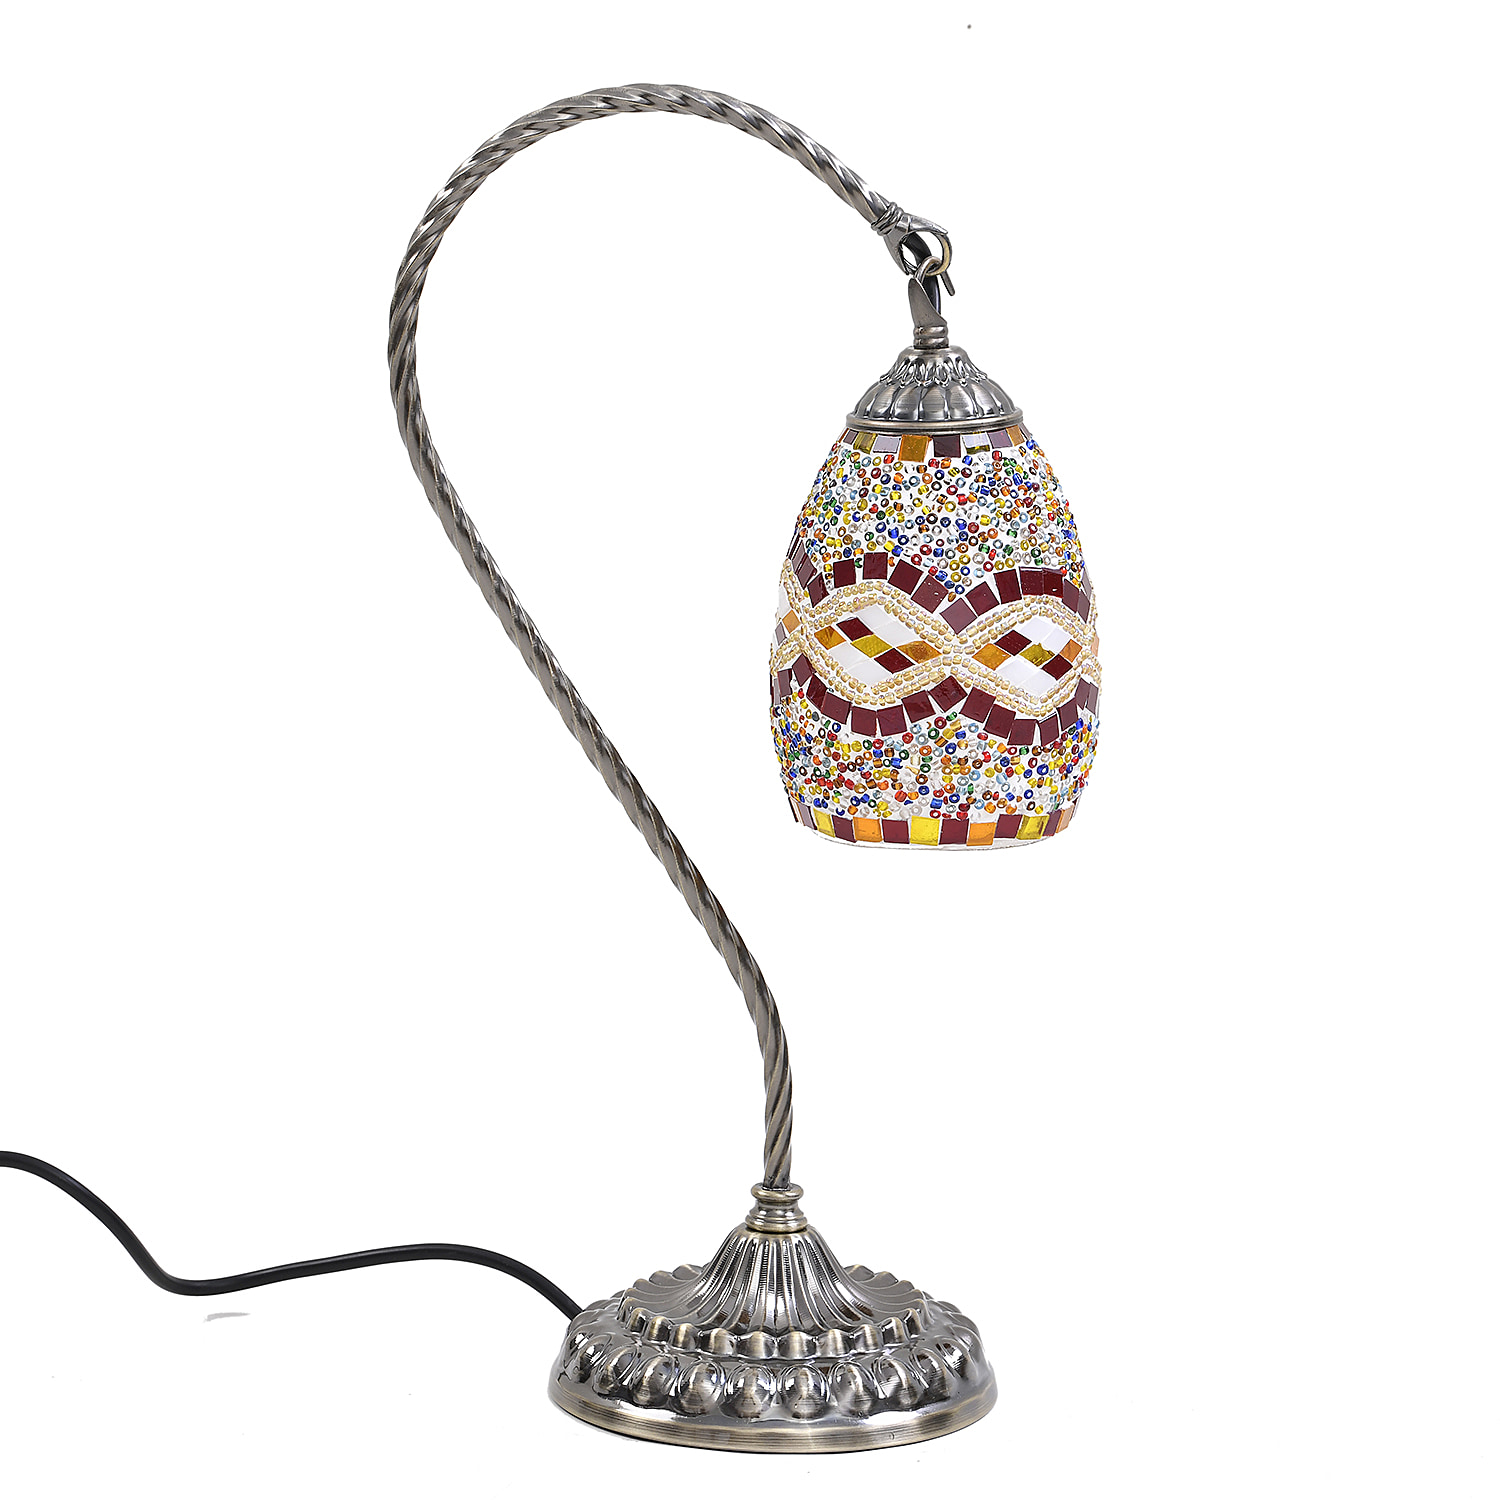 Handmade Turkish Mosaic  lampshade Shape Table Lamp for Home Décor, Office Décor and Bedroom Décor - Maroon and Multi